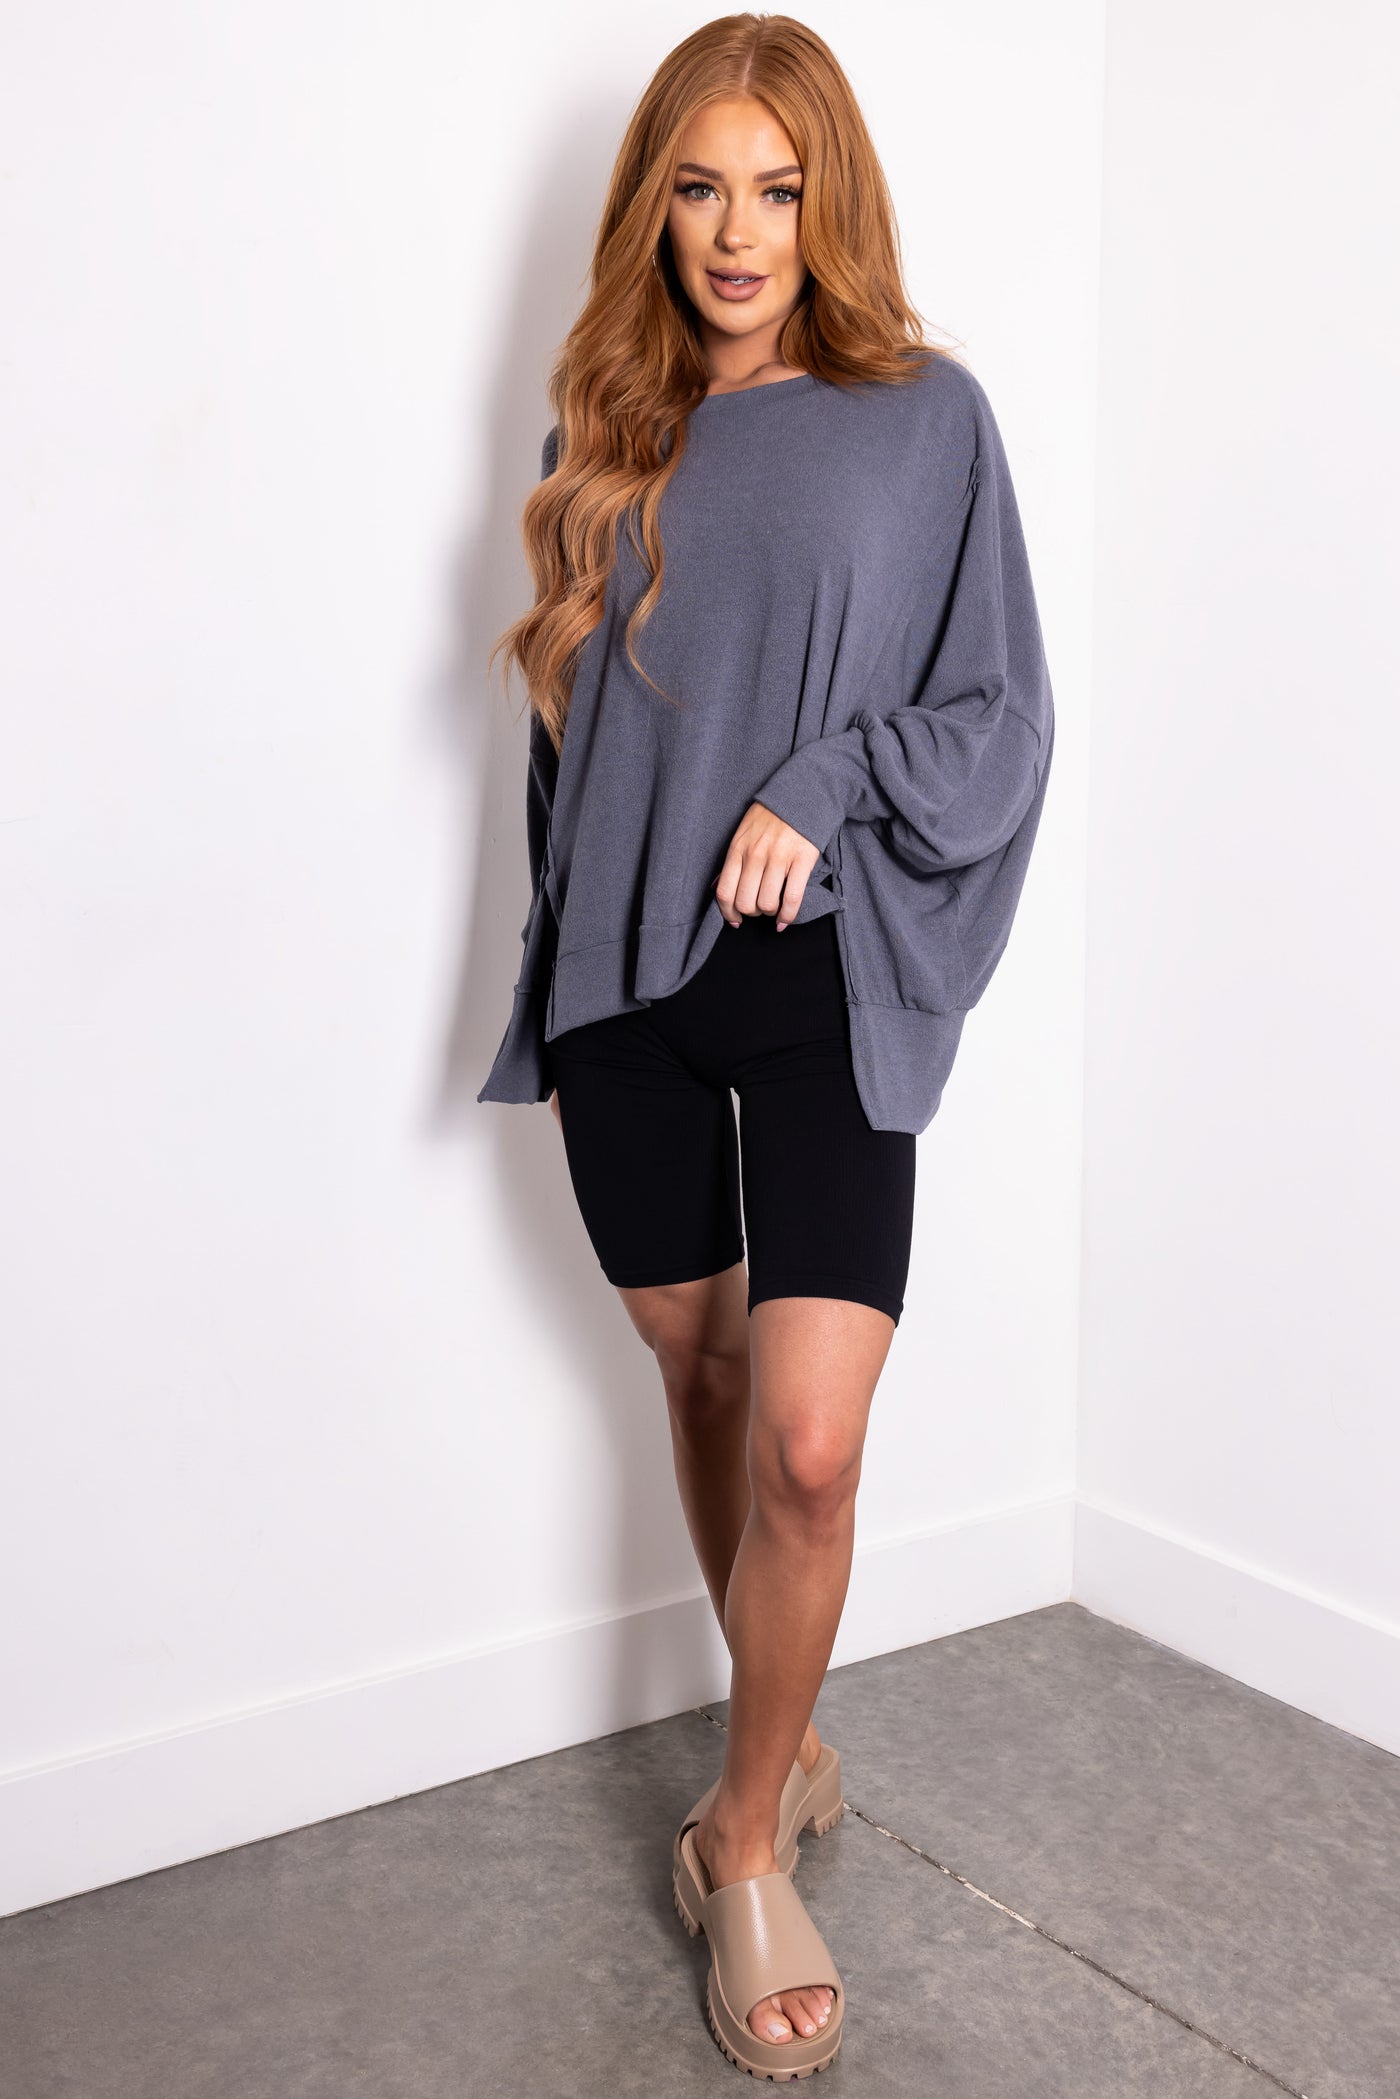 Stormy Grey Long Sleeve Oversized Top